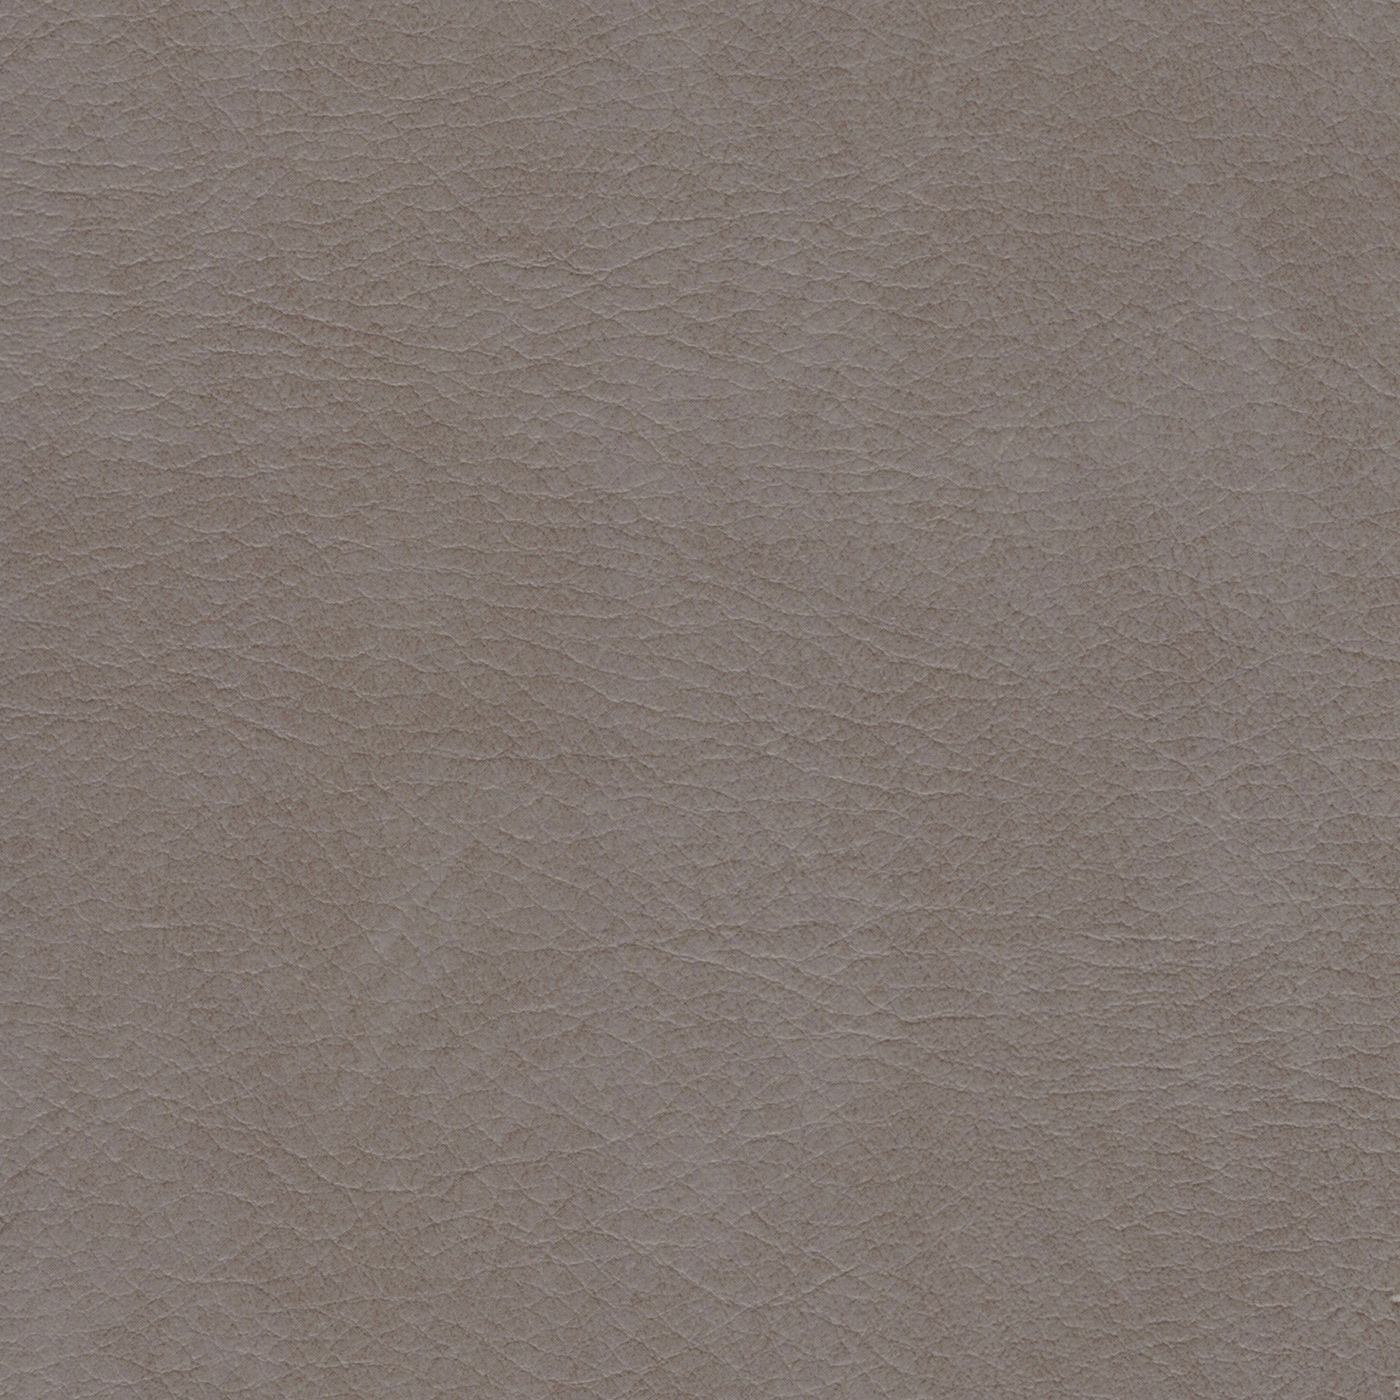 ALG-7064 - Taupe